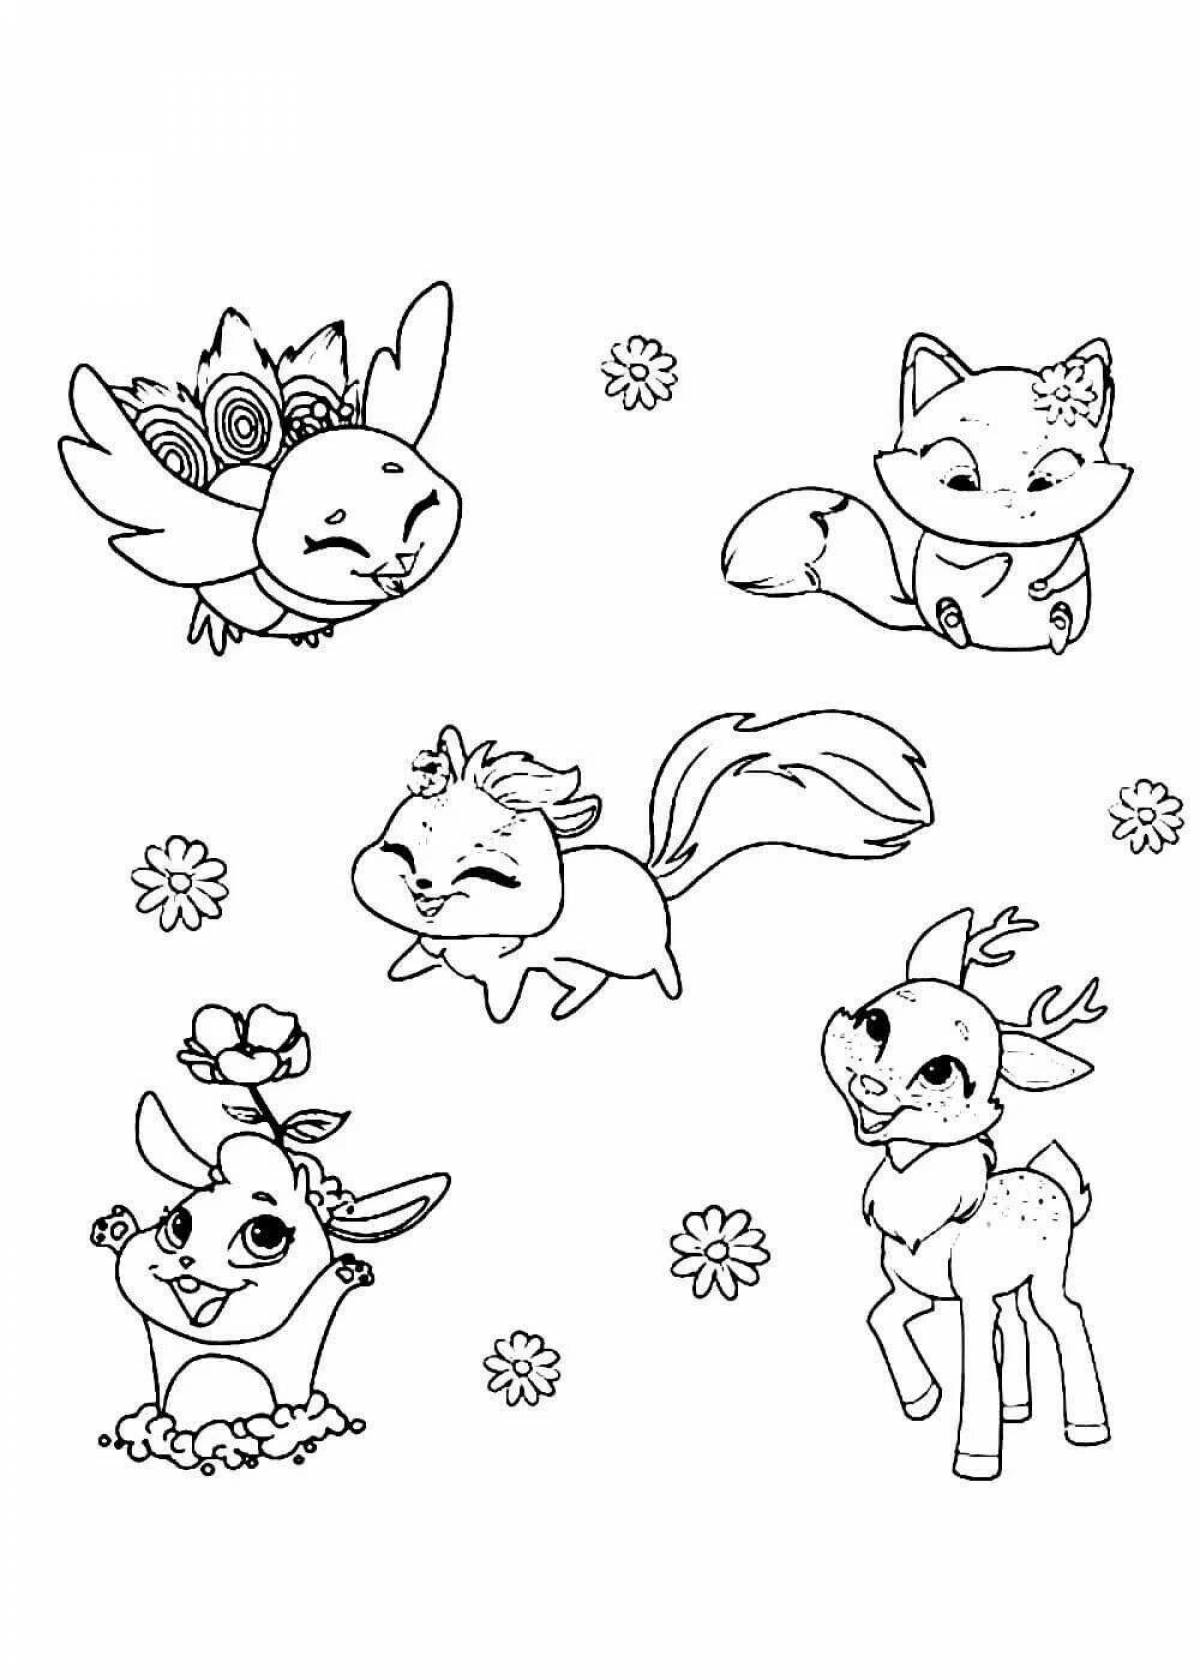 Fun coloring little animals for girls